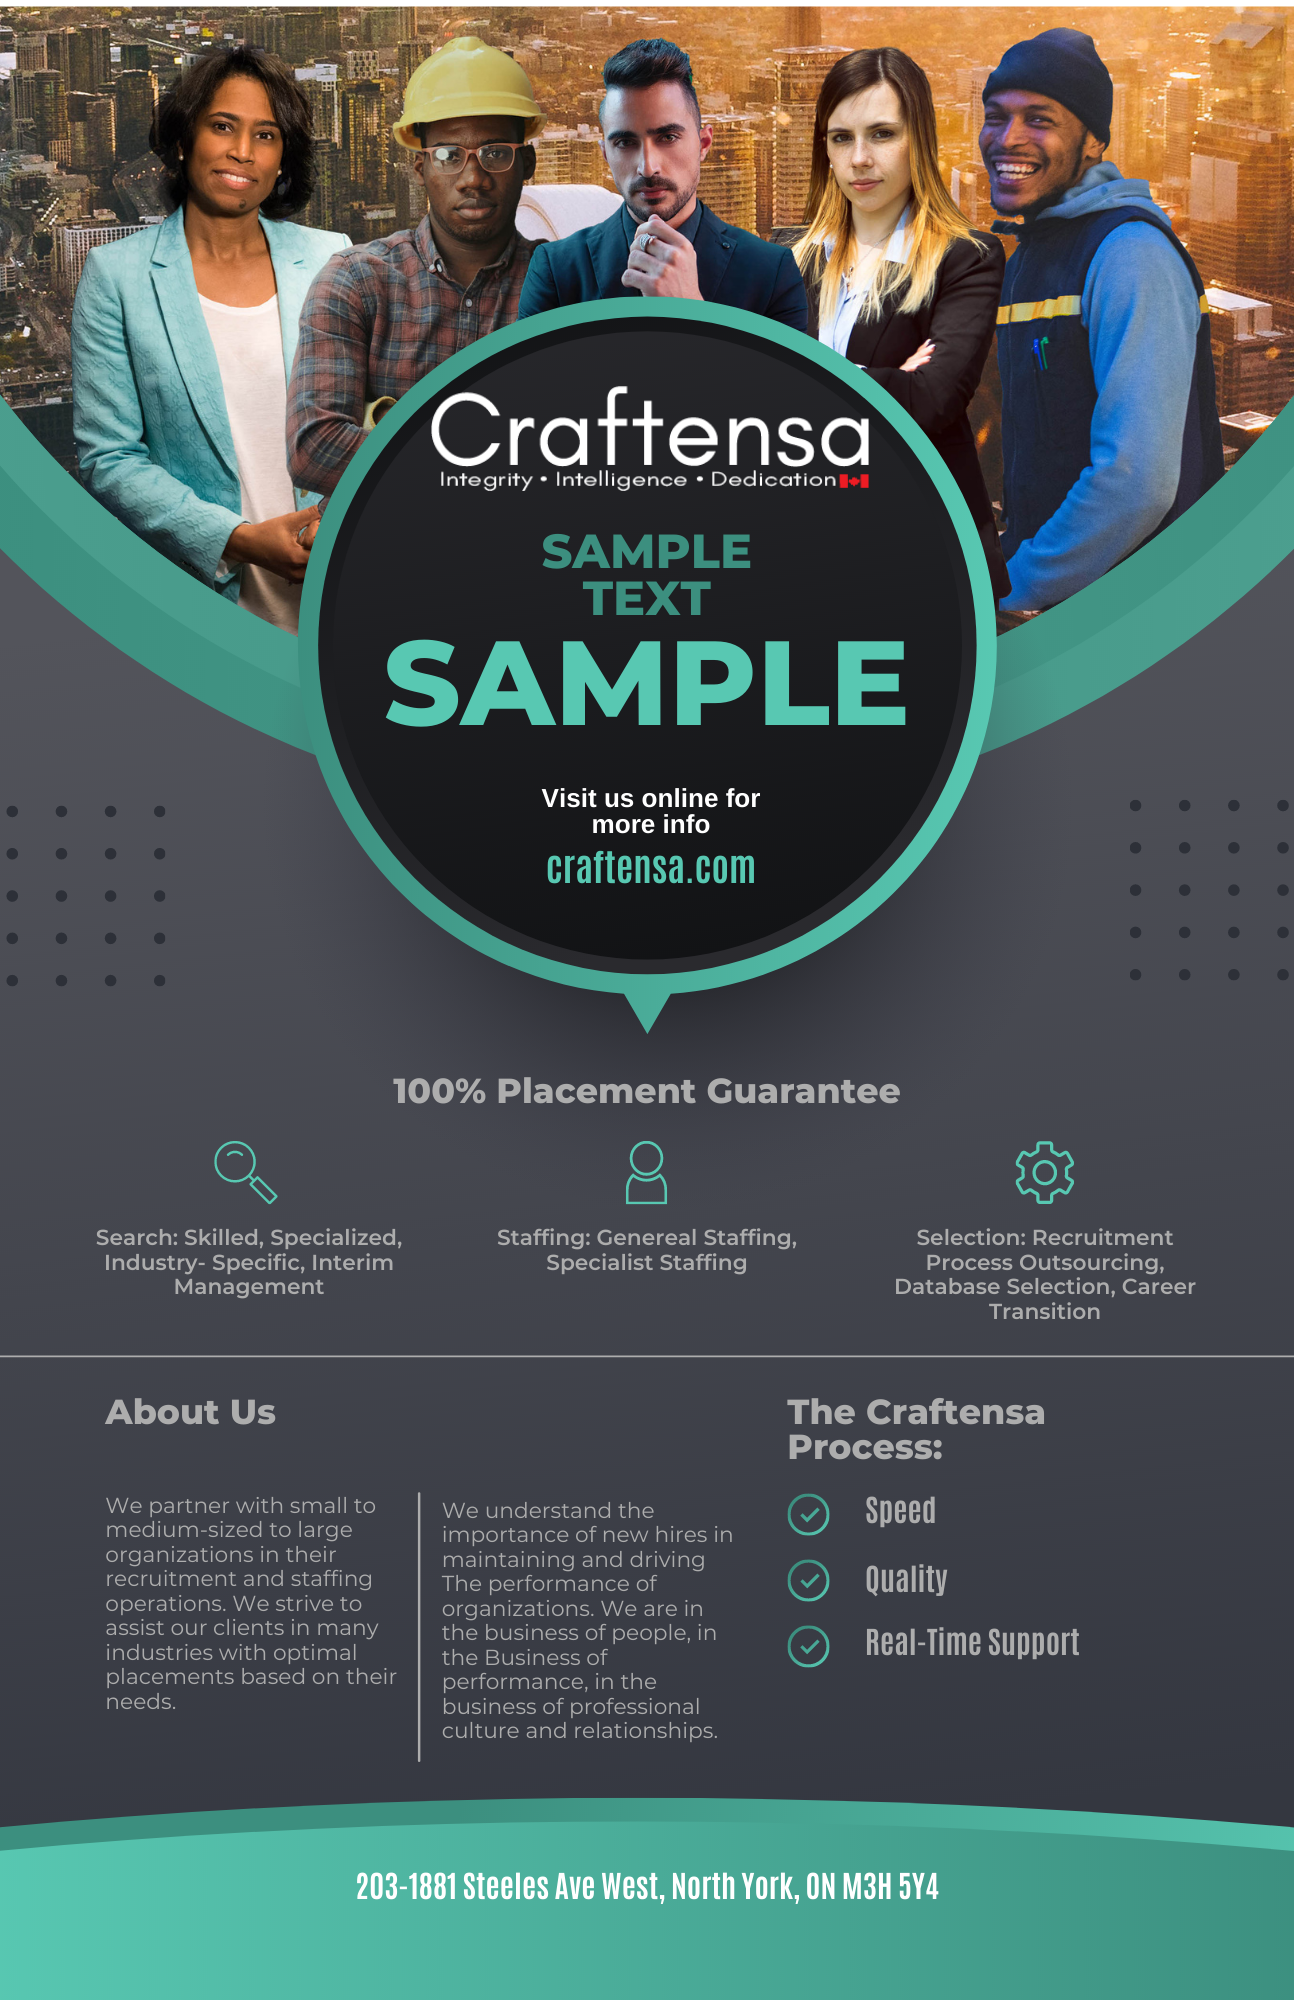 Craftensa Marketing Flyer.png